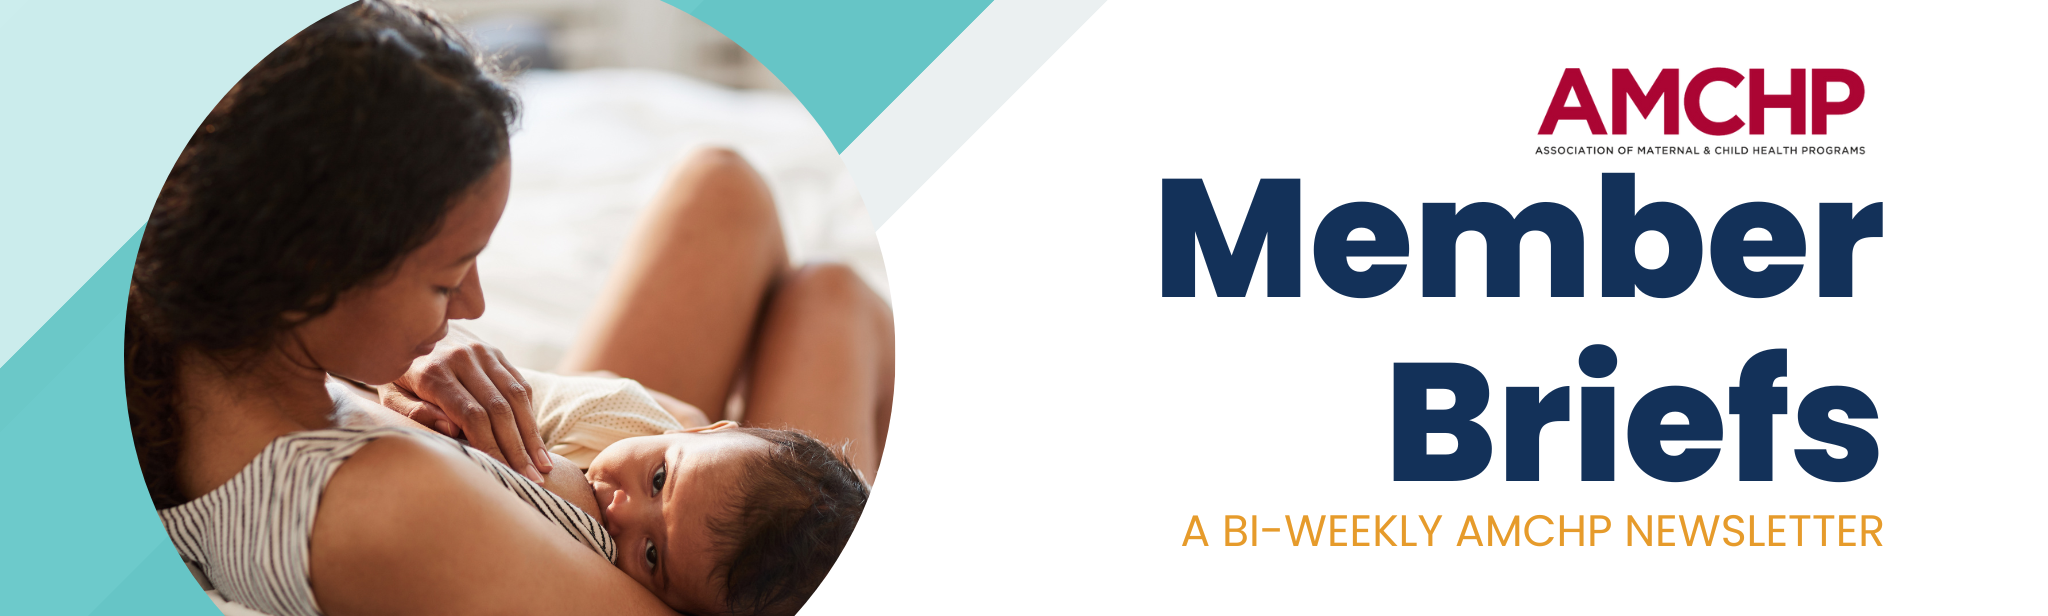 Member Briefs Banner: A bi-weekly AMCHP newsletter. Image of mother breastfeeding her baby.